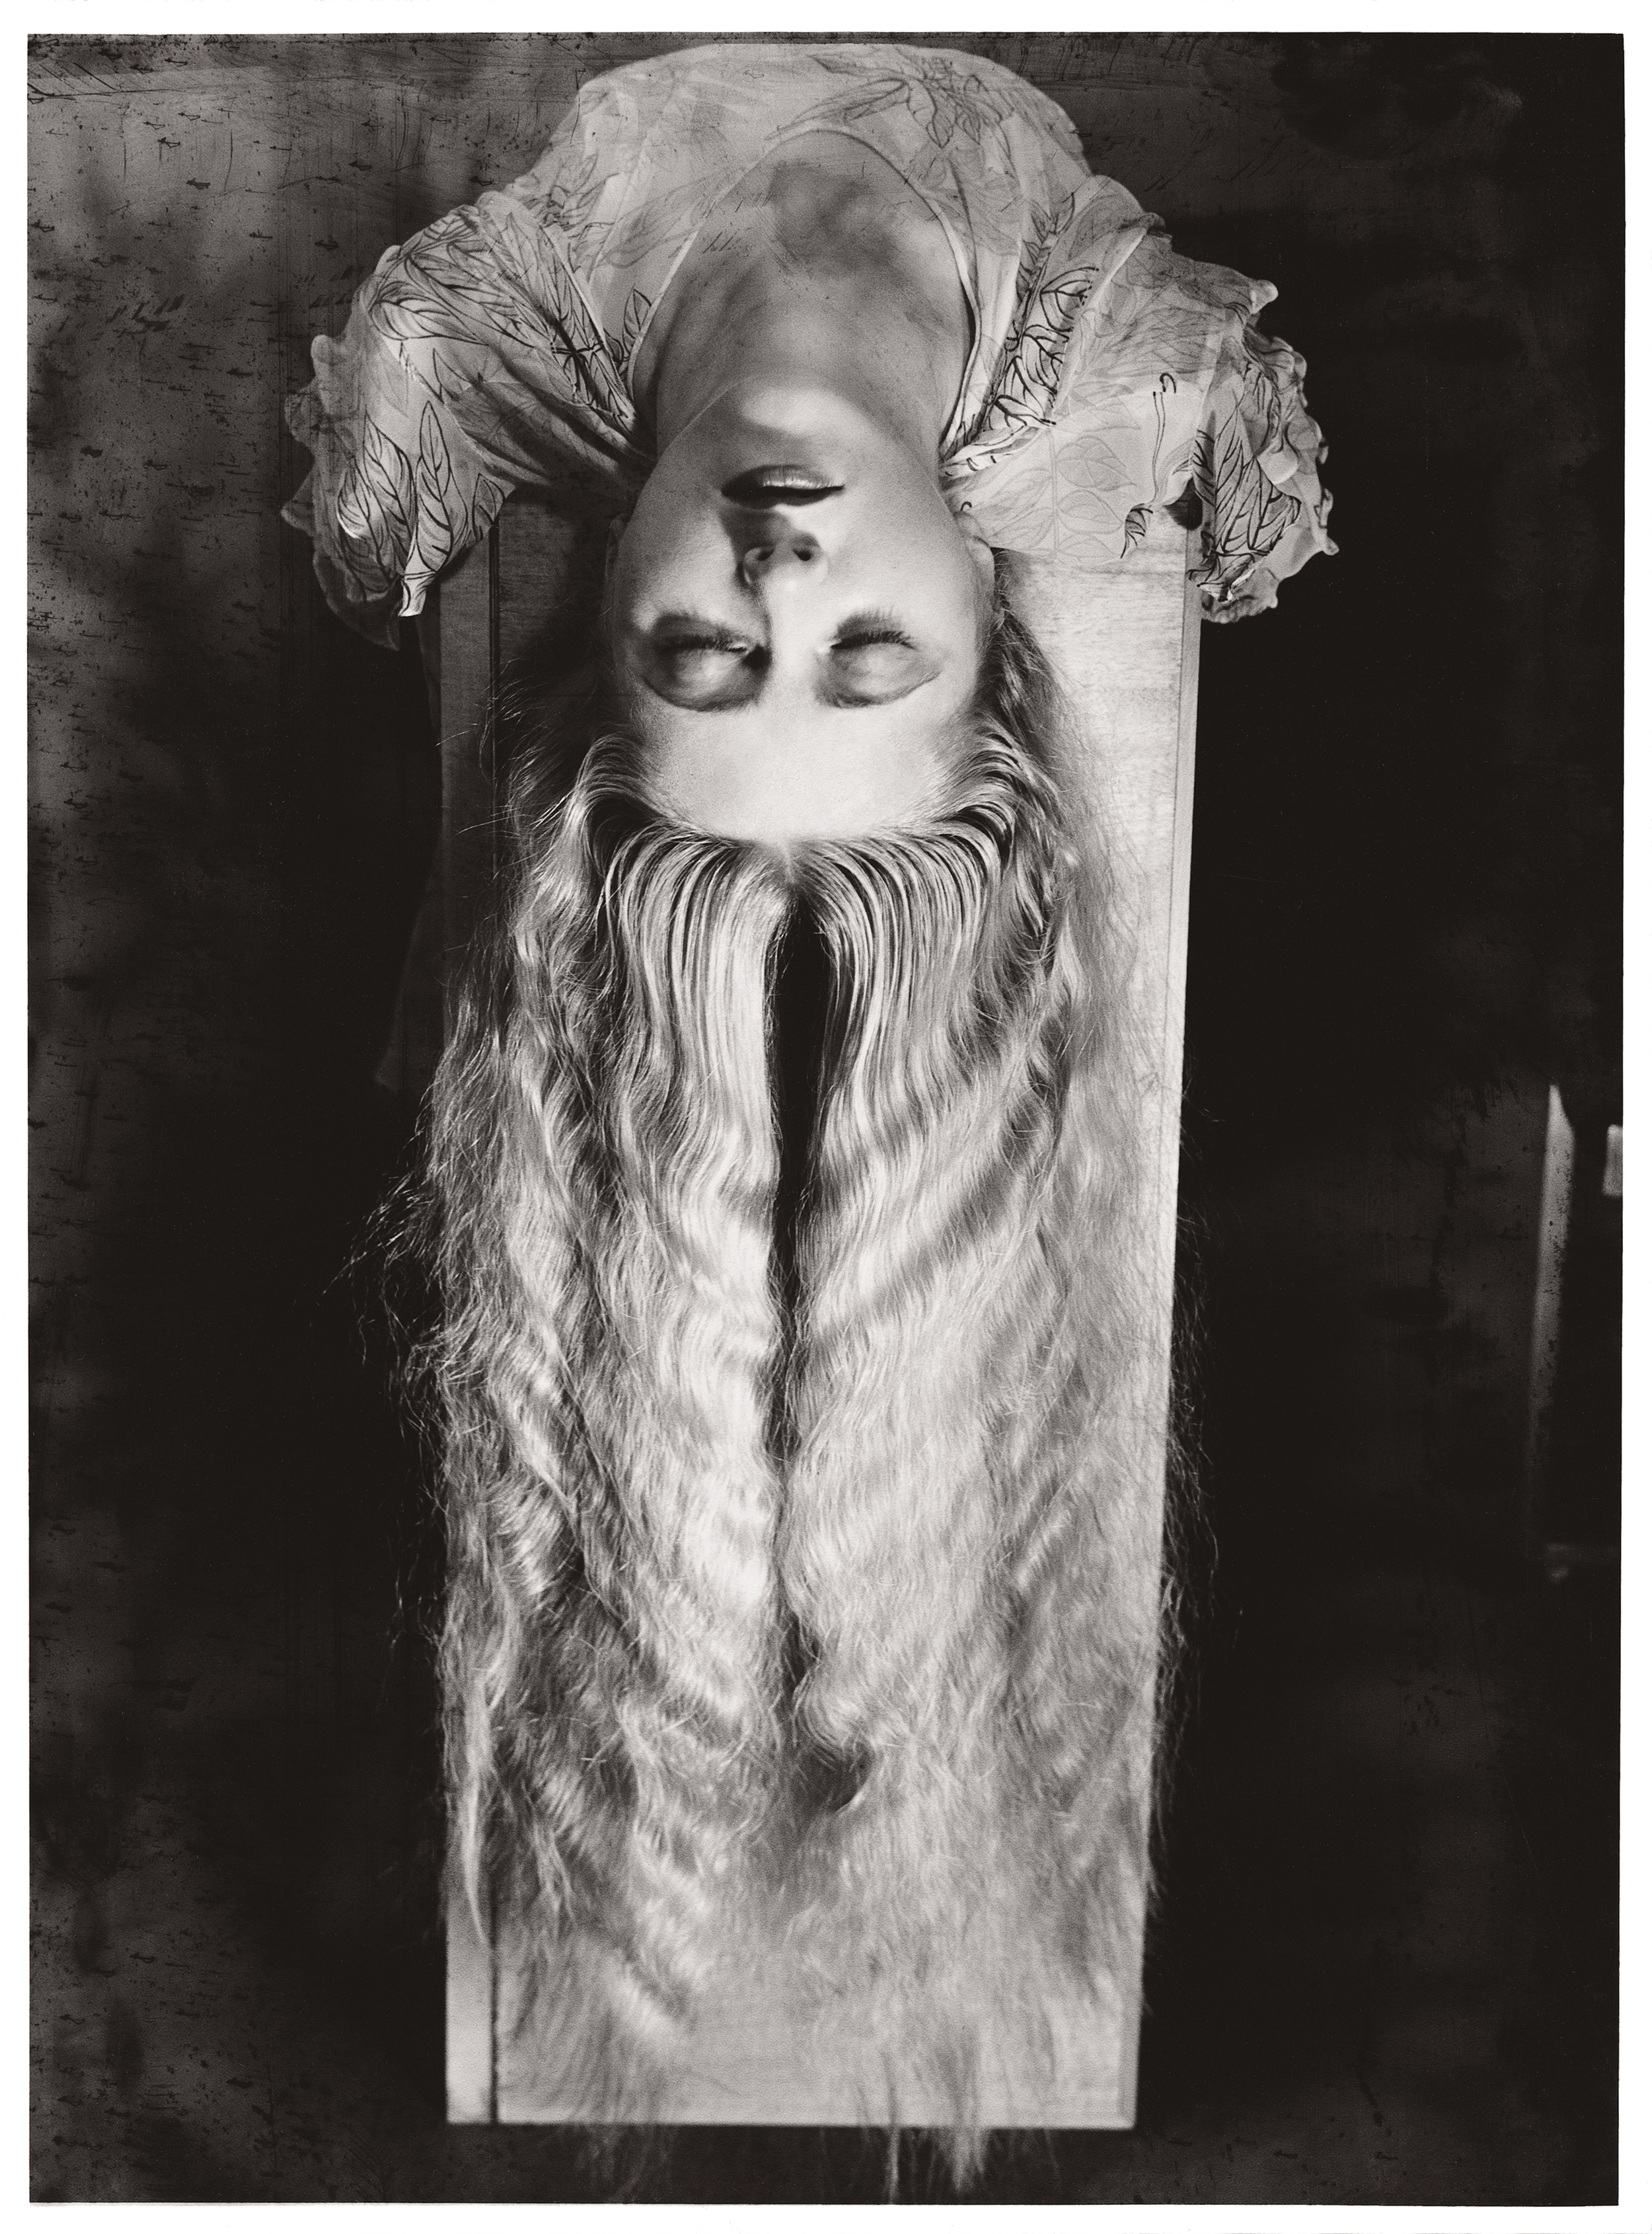 Femme aux cheveux longs by Man Ray - 1929 - - collection privée